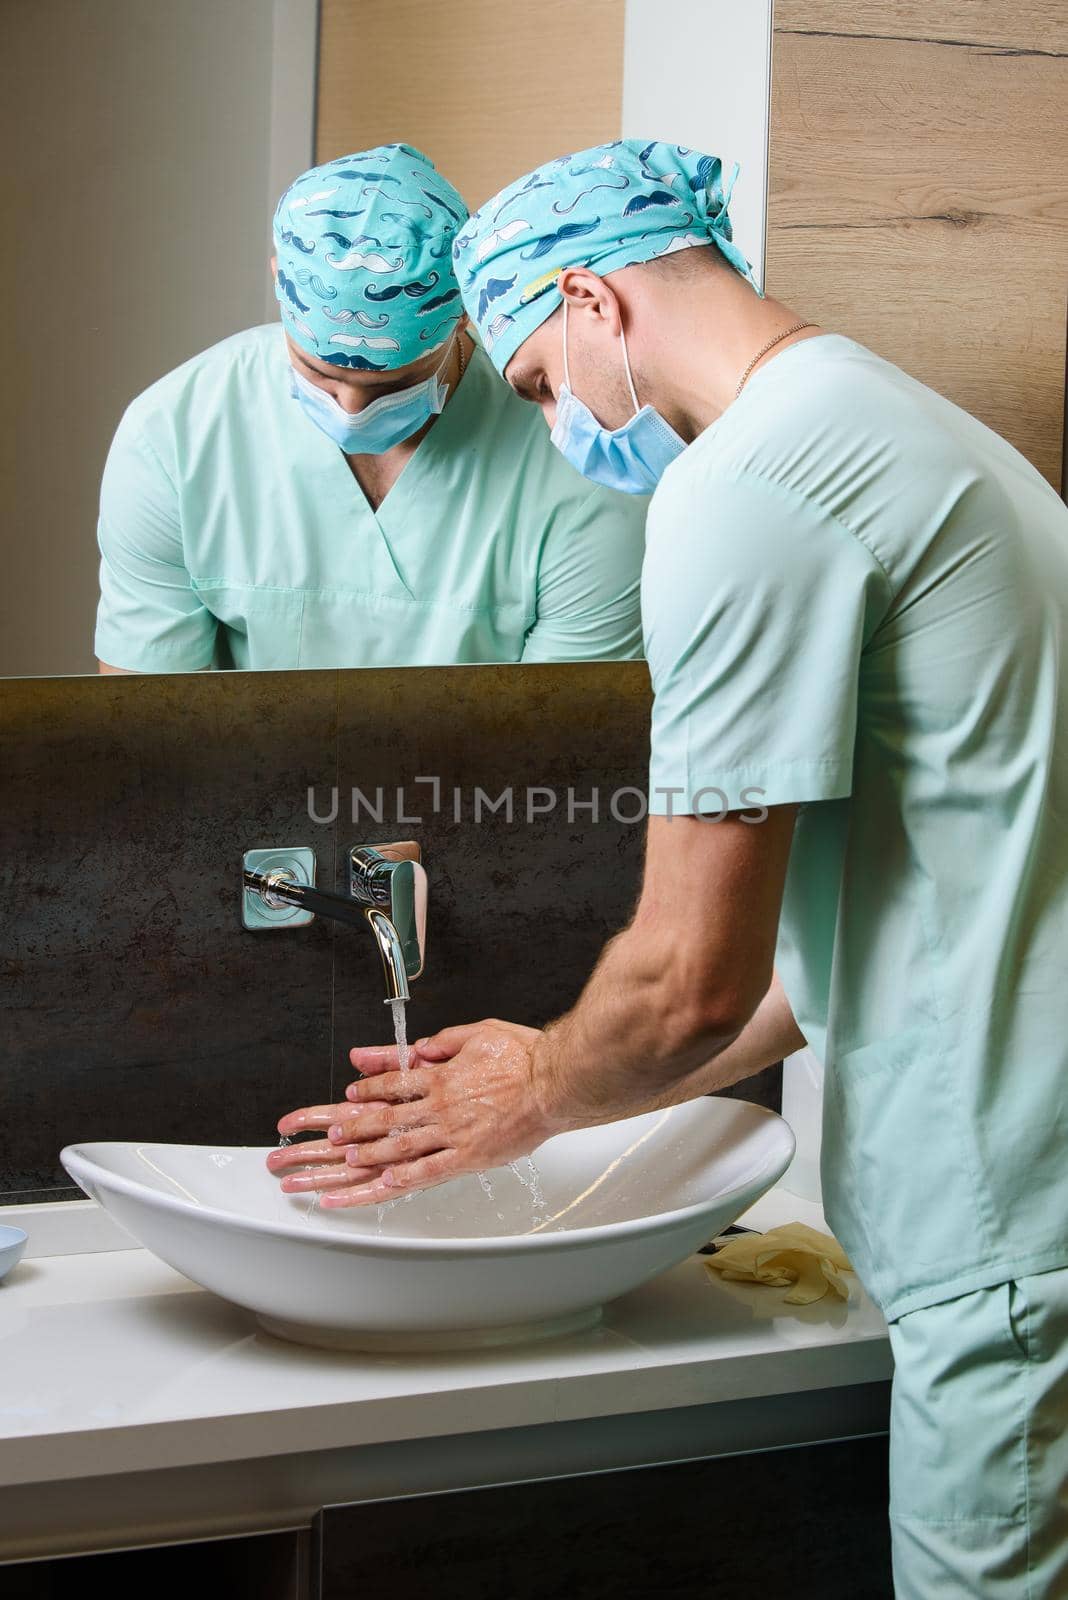 Medical student surgeon cleans his hands with antiseptic. wash hands with soap often under water to stop pandemic of coronavirus covid 19